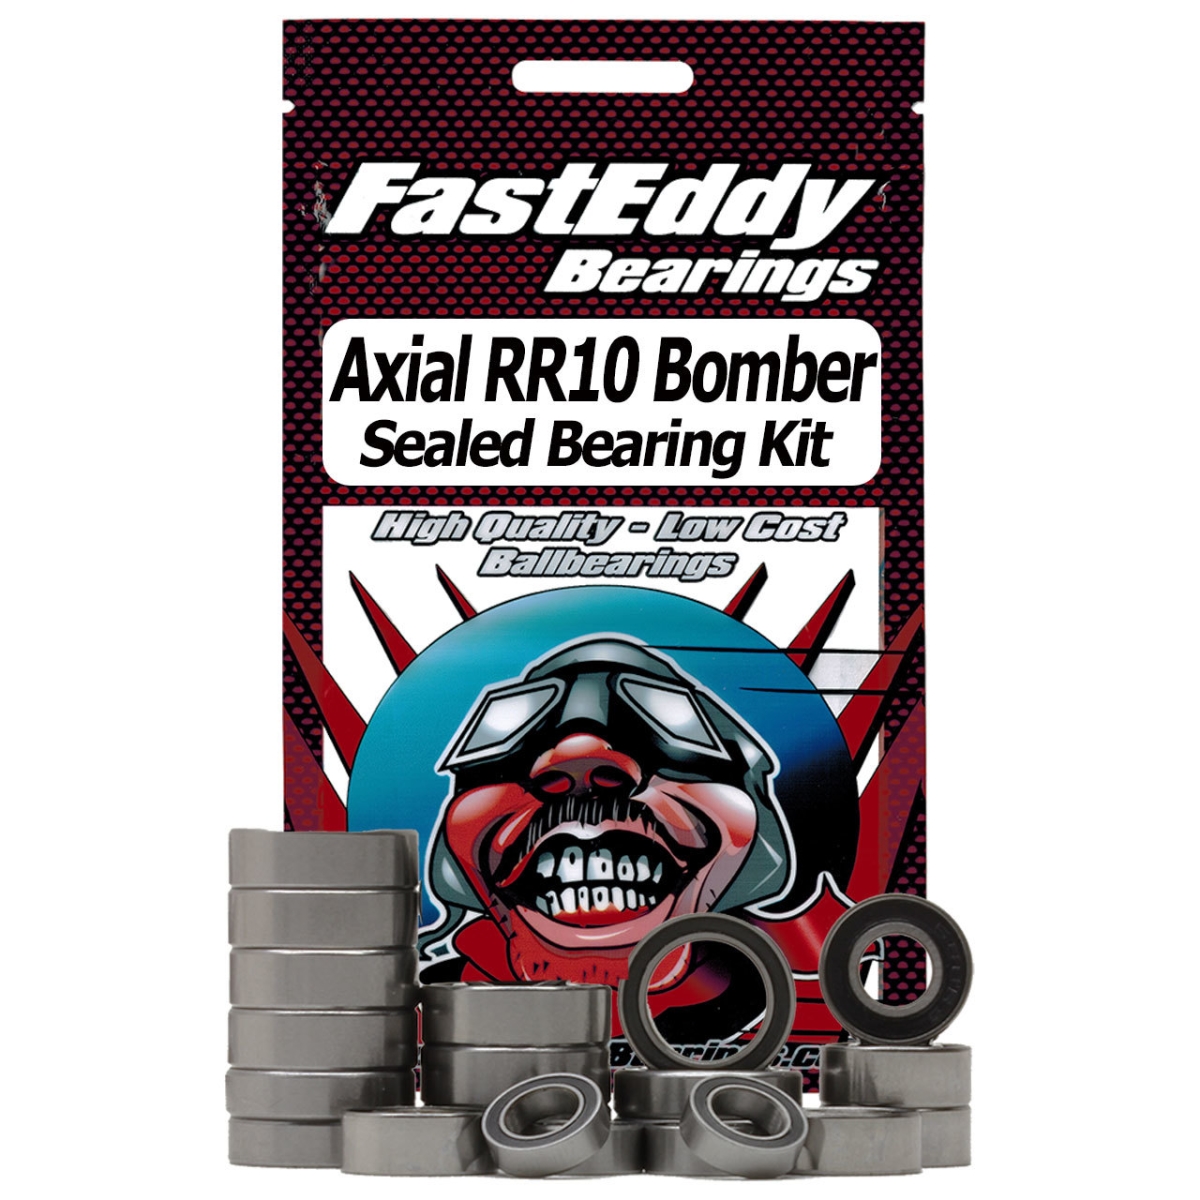 TFE4212 Axial RR10 Bomber Sealed Bearing Kit -  FastEddy